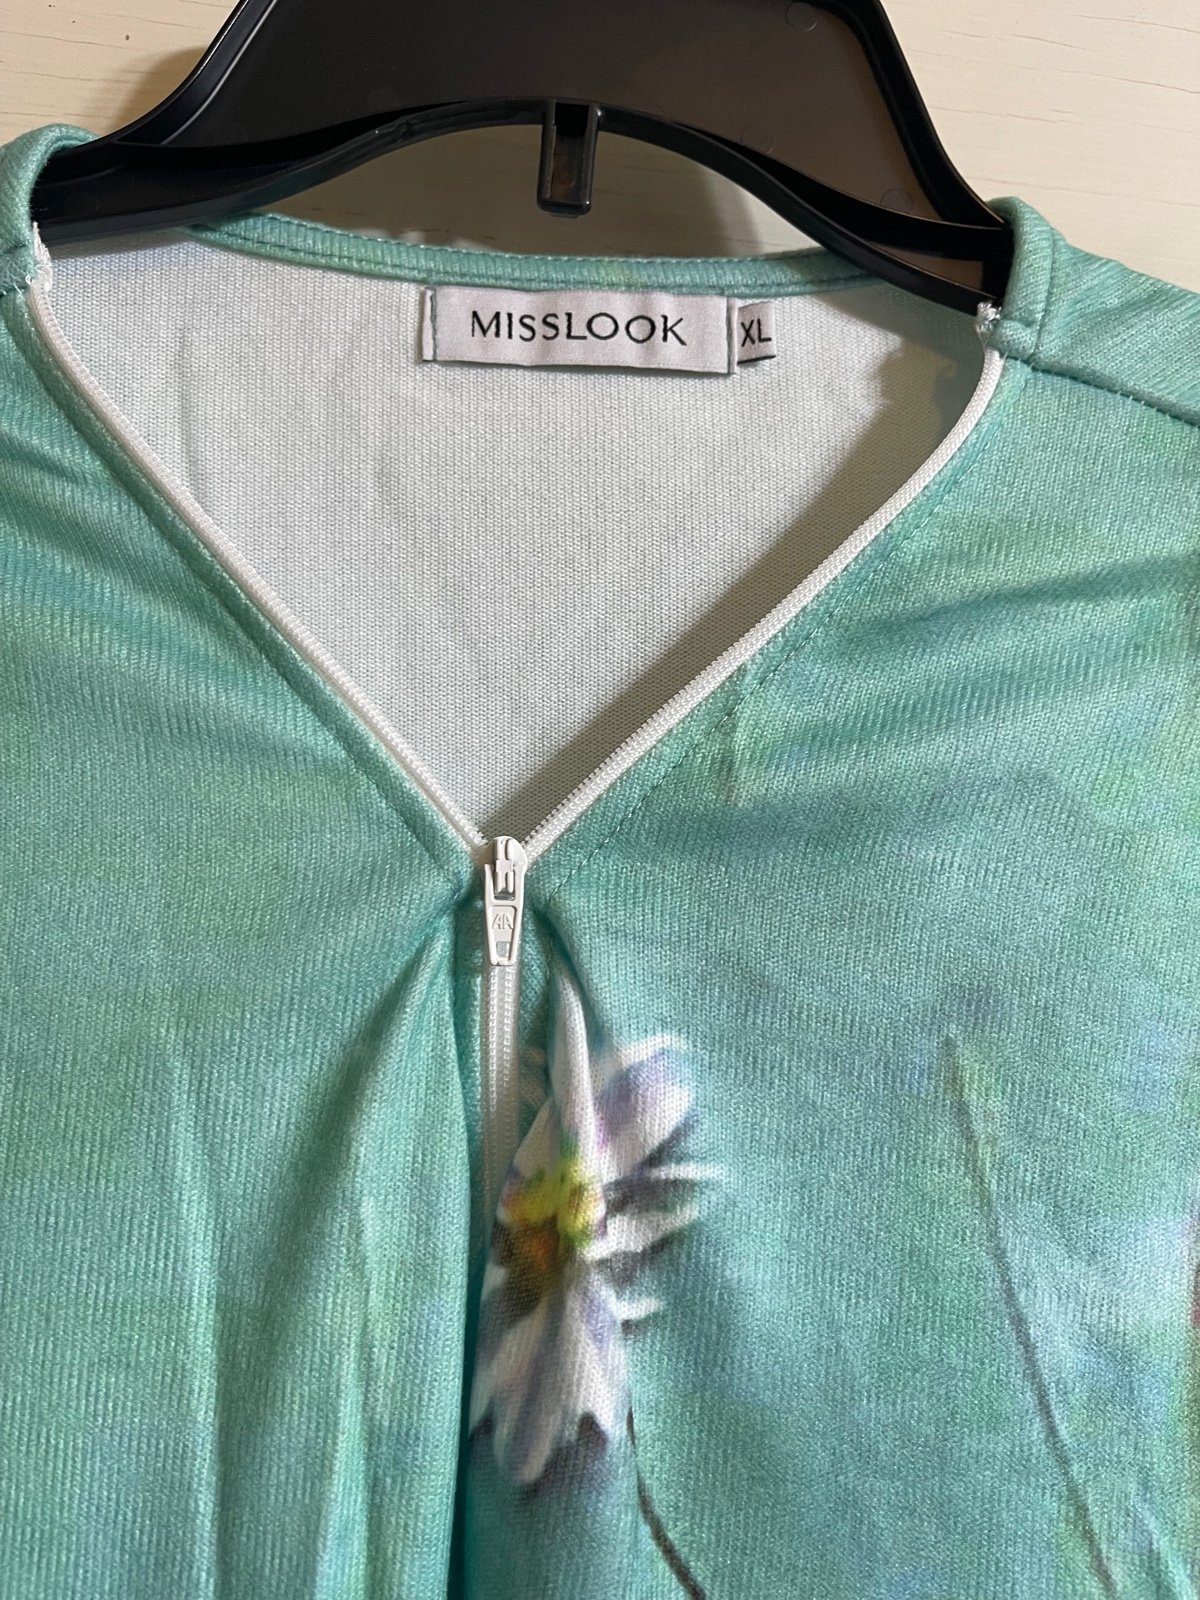 Fashion Green floral sweater from NoraCora size XL fSRjnlPzp Factory Price